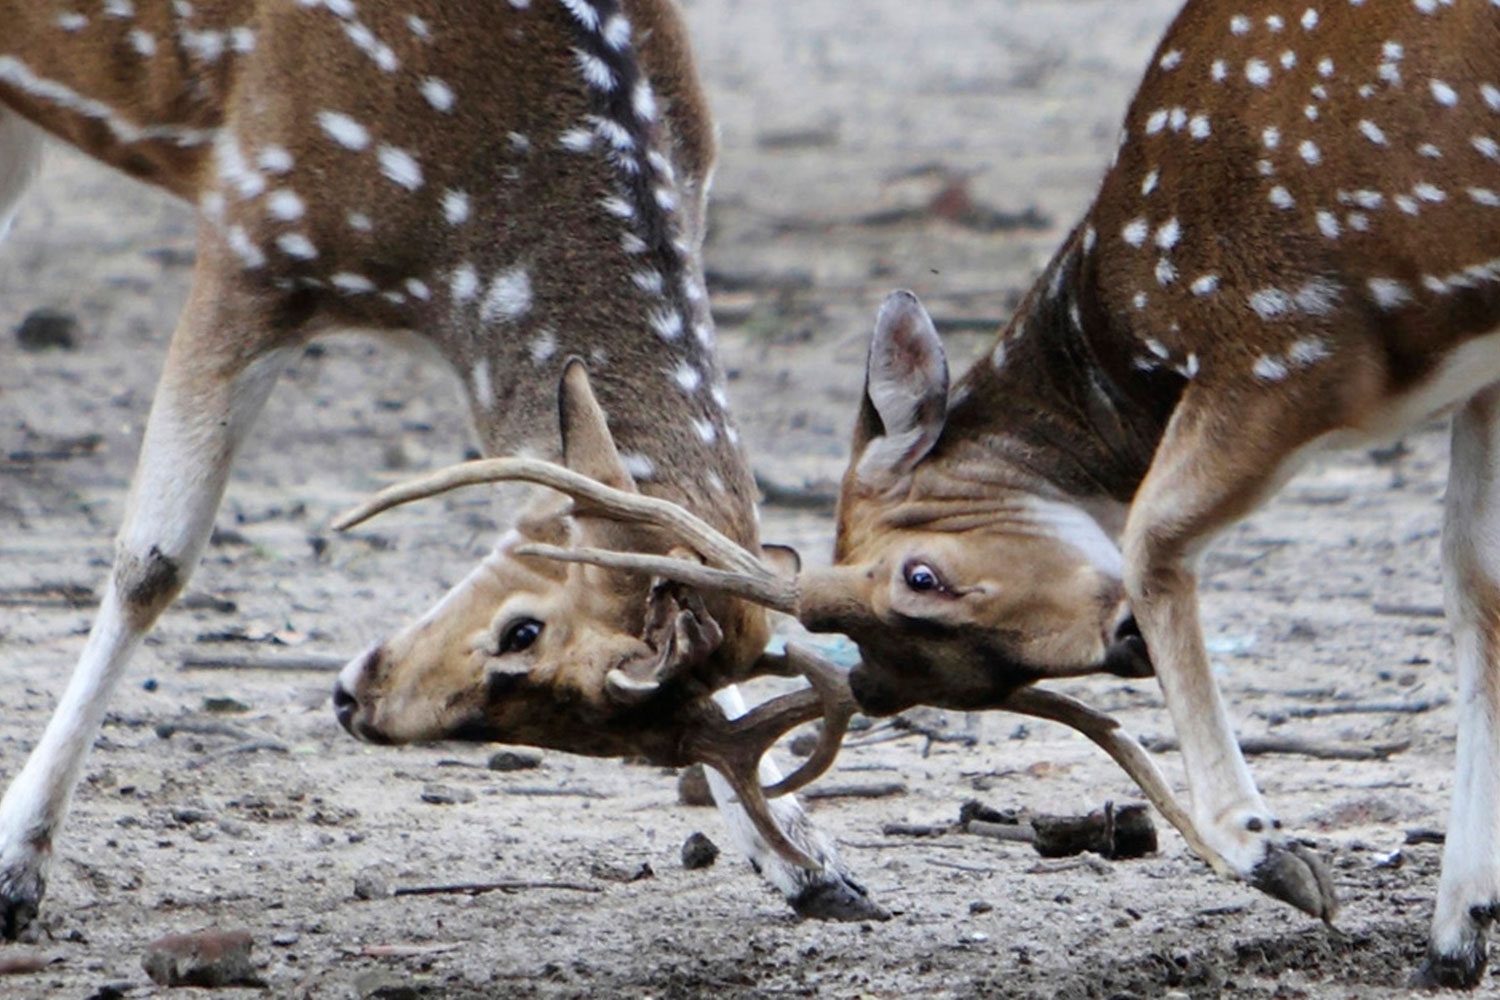 Spotted deers lock horns inside a deer park in the premises of Pashupatinath Temple in Kathmandu, July 12, 2011. Spotted deer are also known as Chital deer or Axix deer commonly inhabit on wooded regions of Nepal, India, Sri Lanka, Bangladesh, Bhutan and Pakistan.